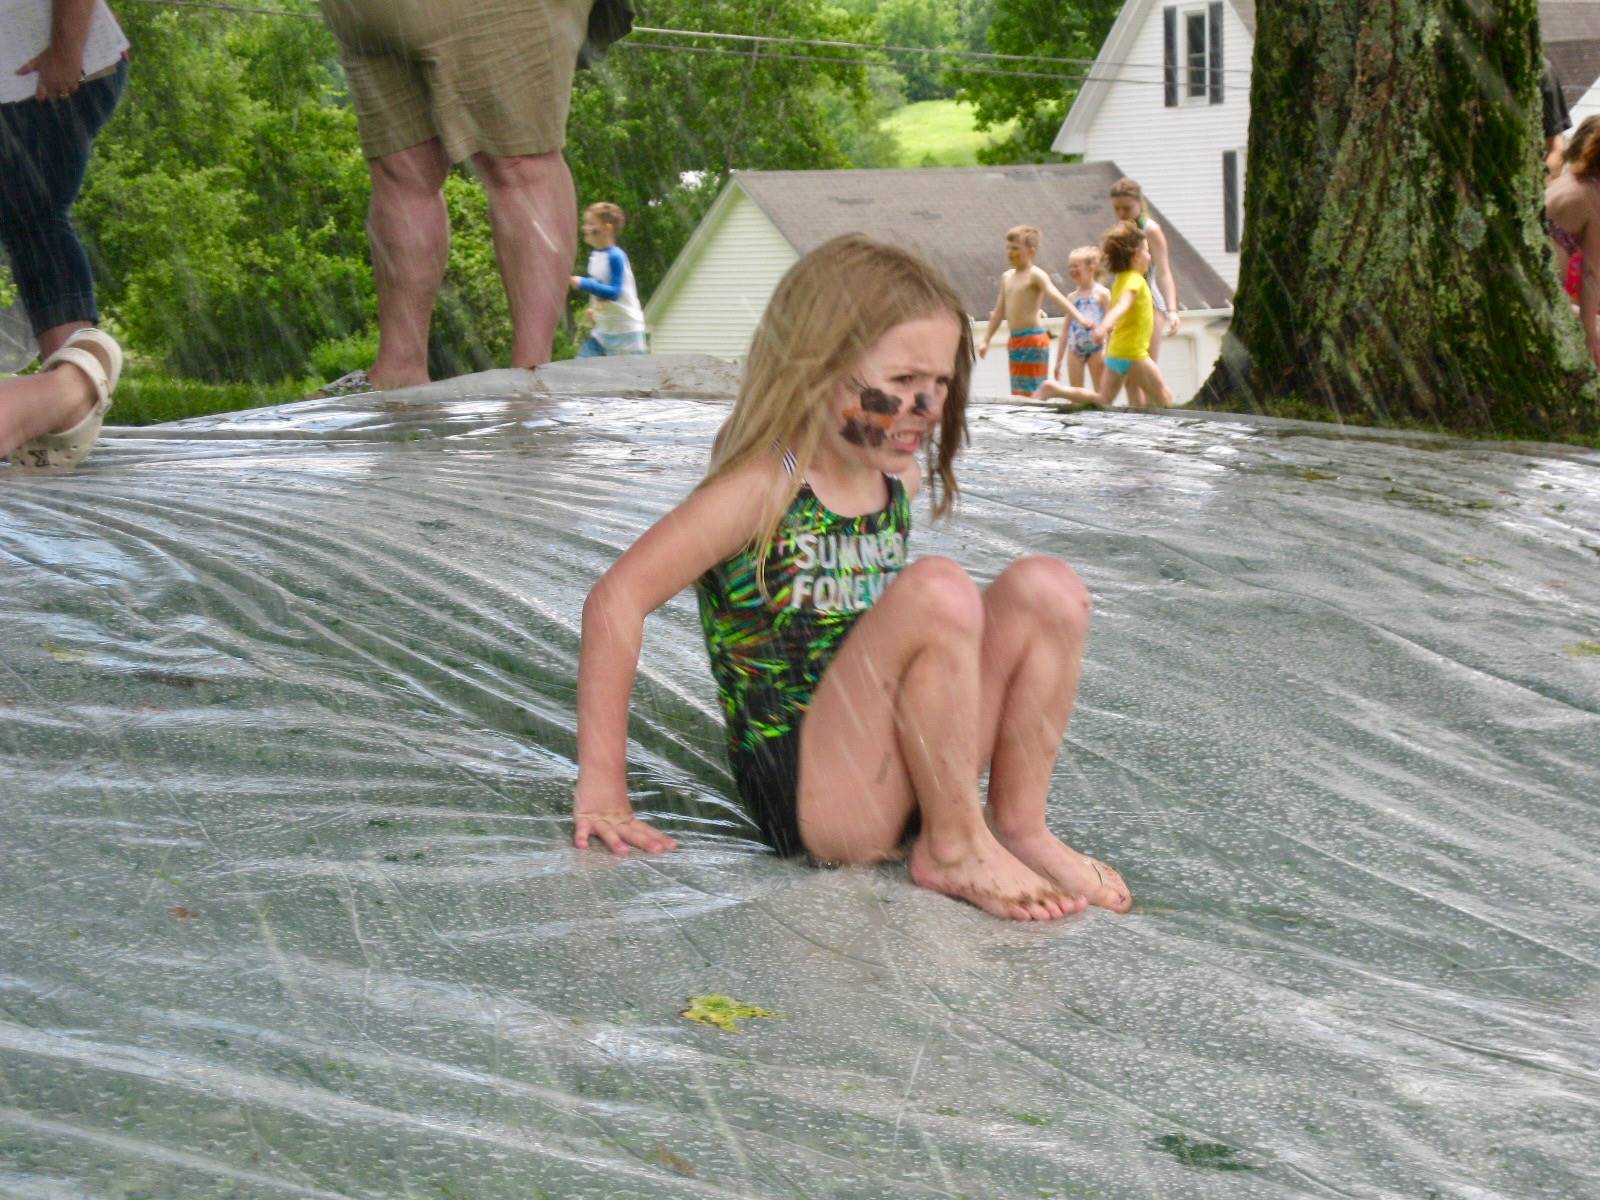 A student on water slide.